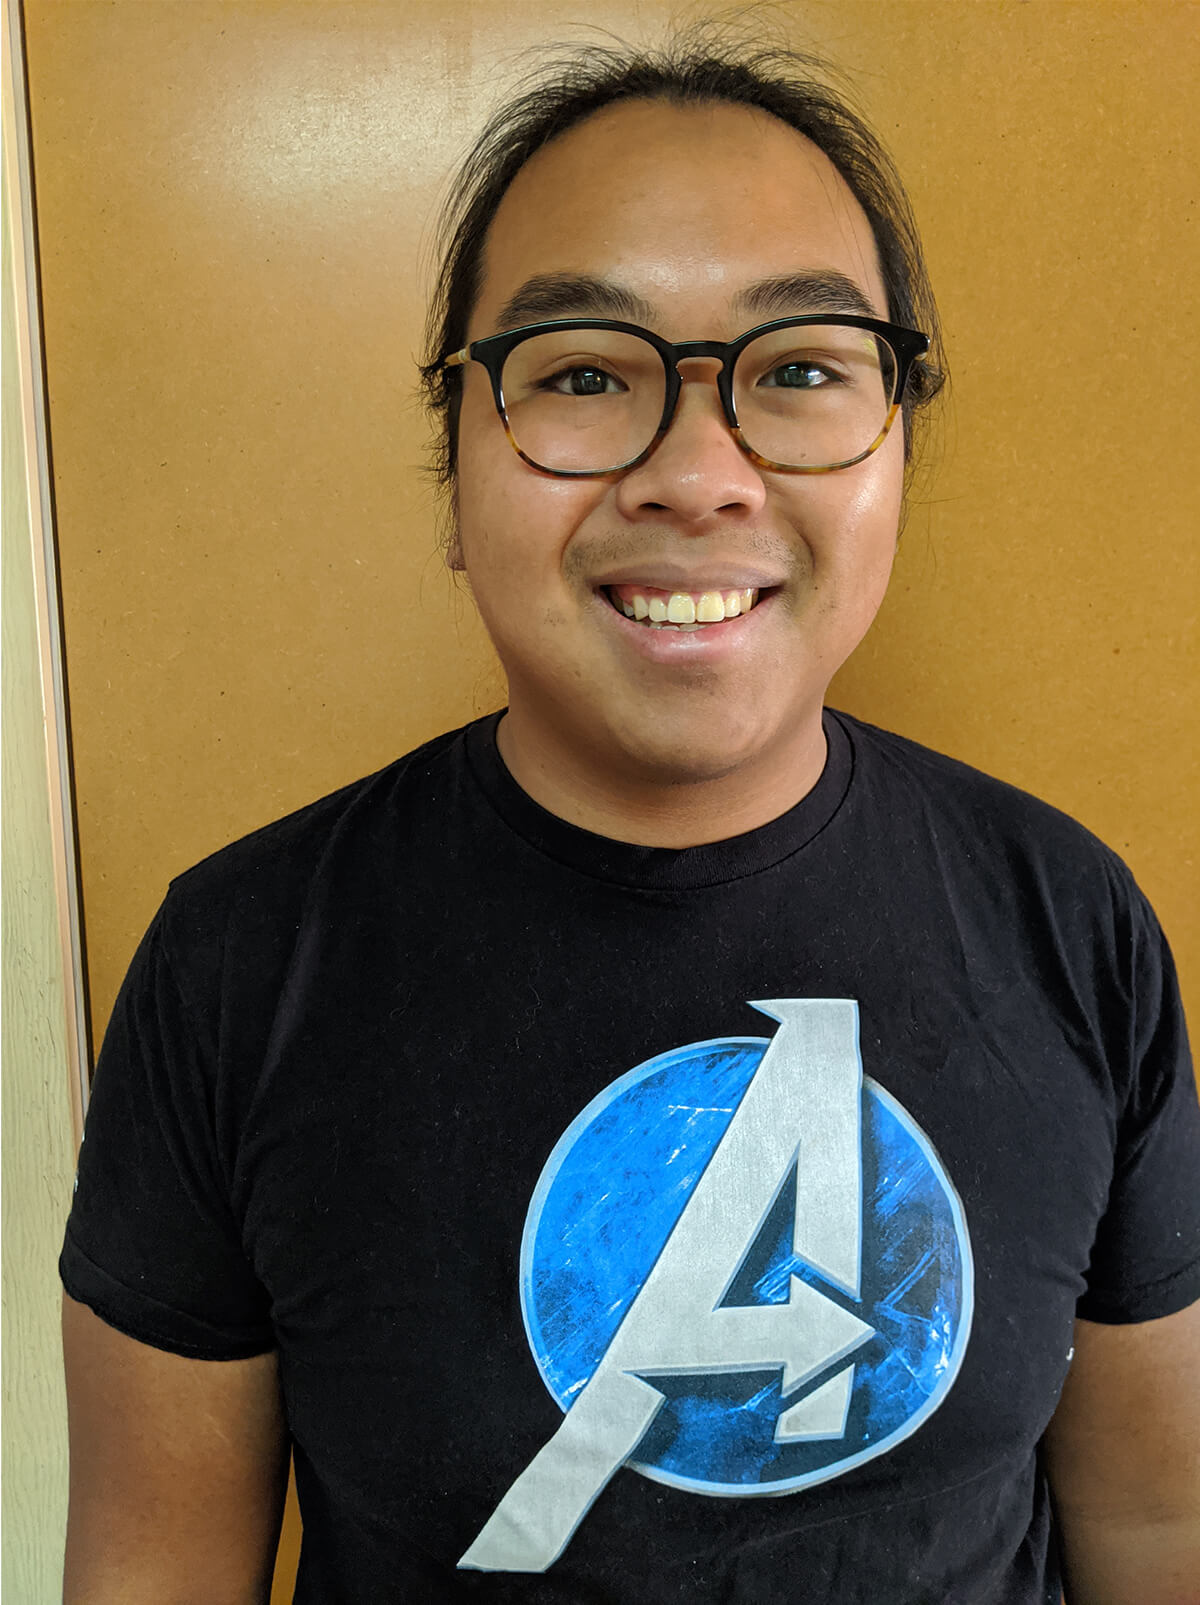 DigiPen graduate Kevin Do poses in an Avengers t-shirt